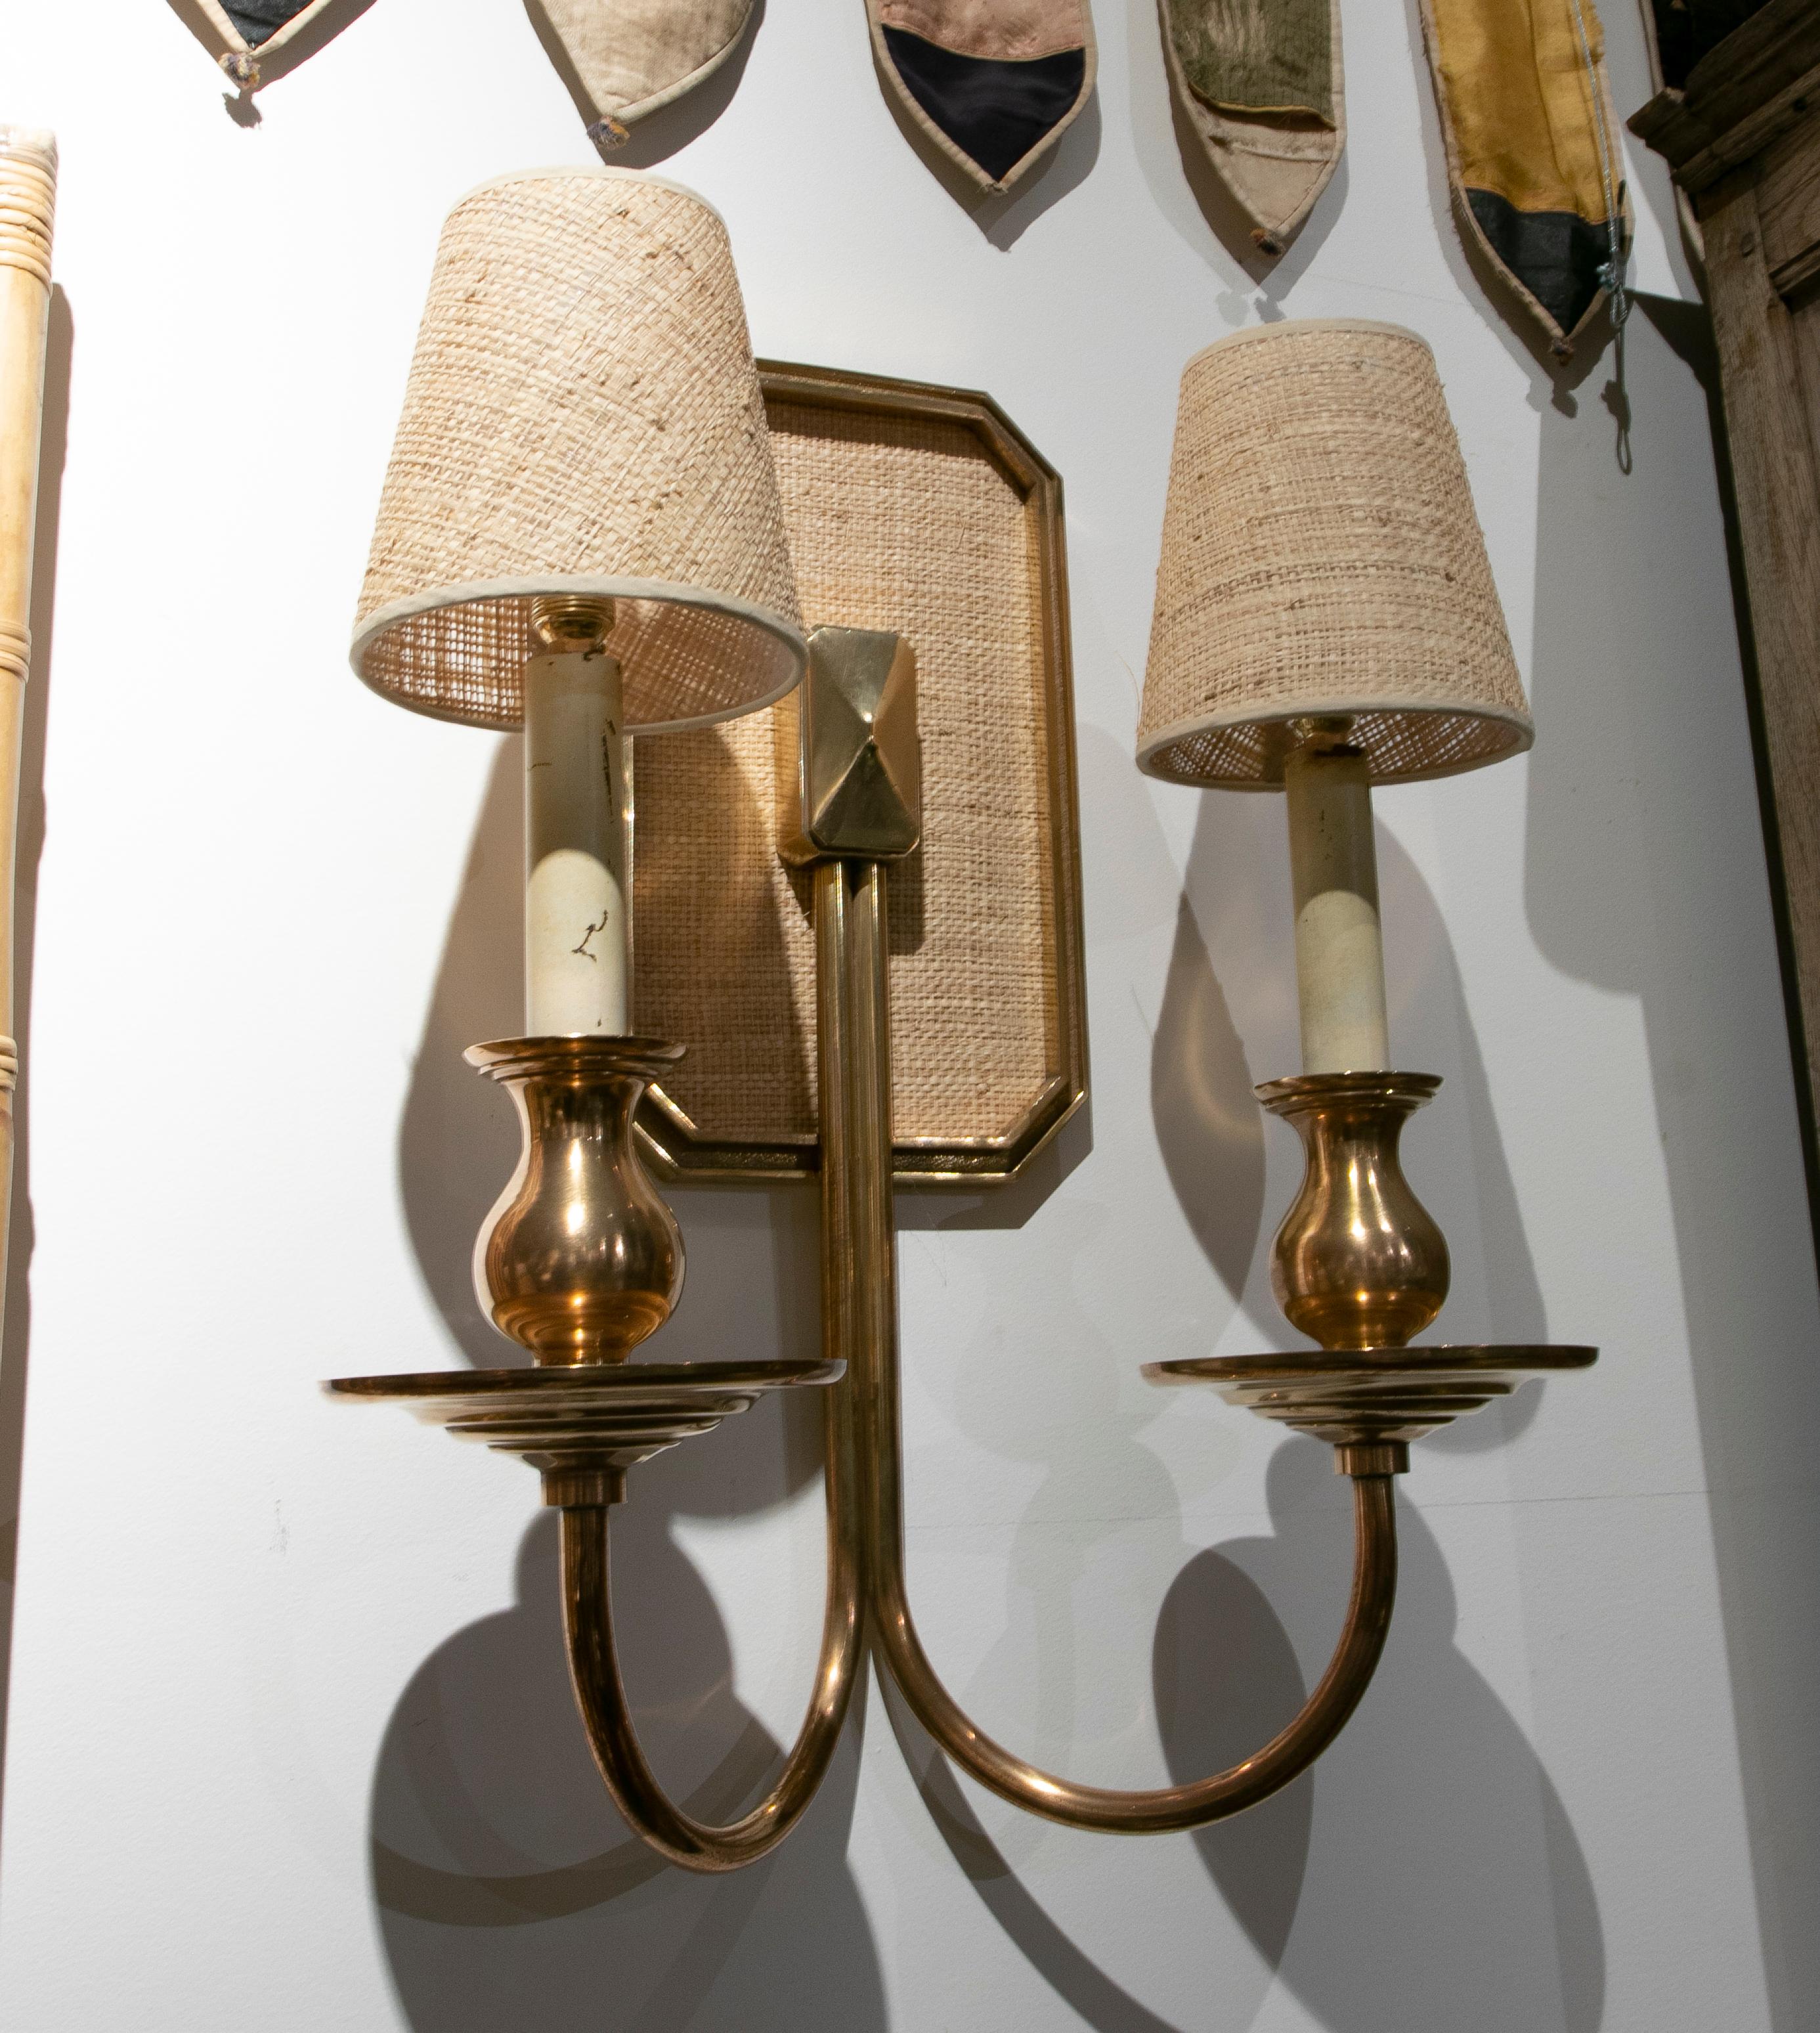 1970s Pair of lined bronze sconces with raffia lampshades.